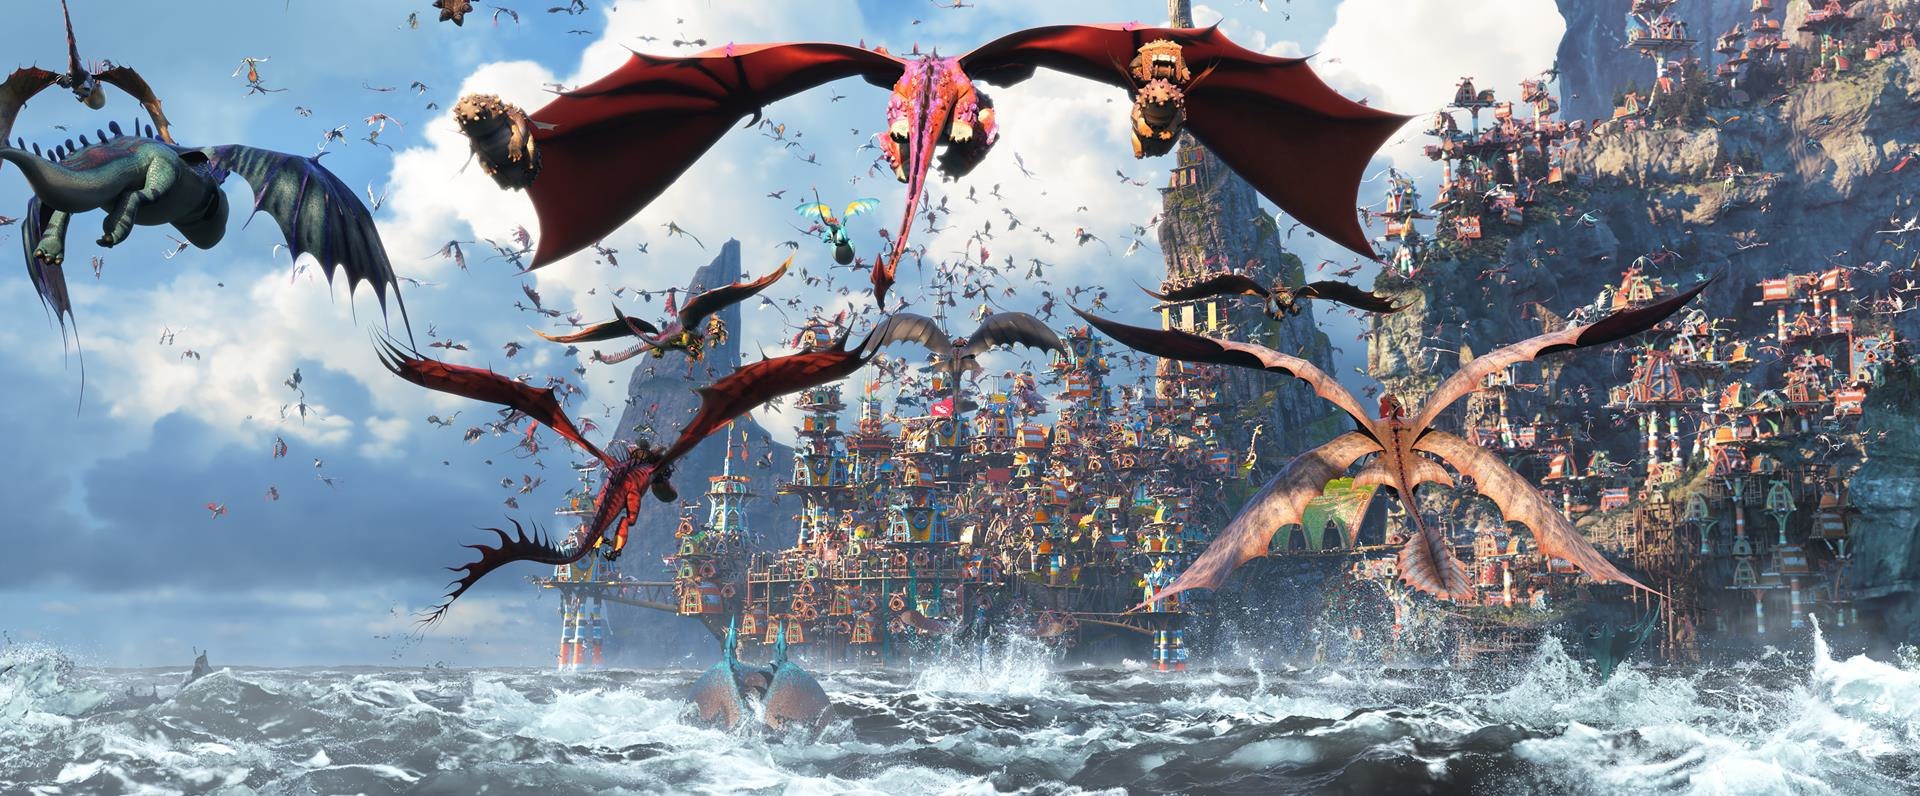 The Viking village of Berk has become a chaotic dragon utopia in director Dean DeBlois’ ‘How To Train Your Dragon: The Hidden World,’ arriving in U.S. theaters on February 22. Images © 2019 DreamWorks Animation LLC. All Rights Reserved.